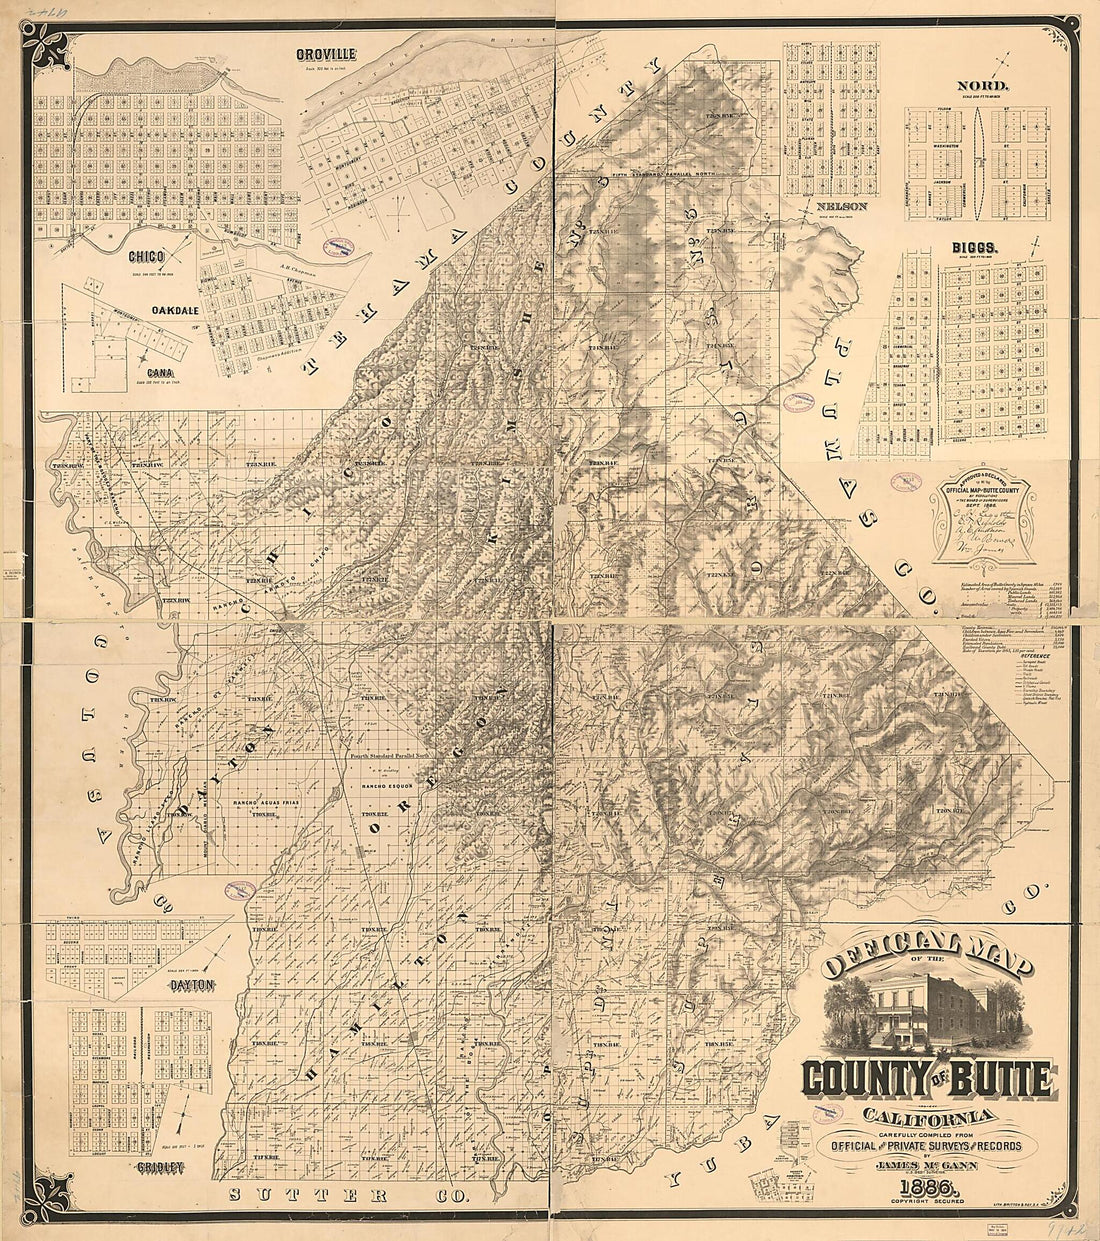 This old map of Official Map of the County of Butte, California : Carefully Compiled from Official and Private Surveys and Records from 1886 was created by  Britton &amp; Rey, James McGann in 1886